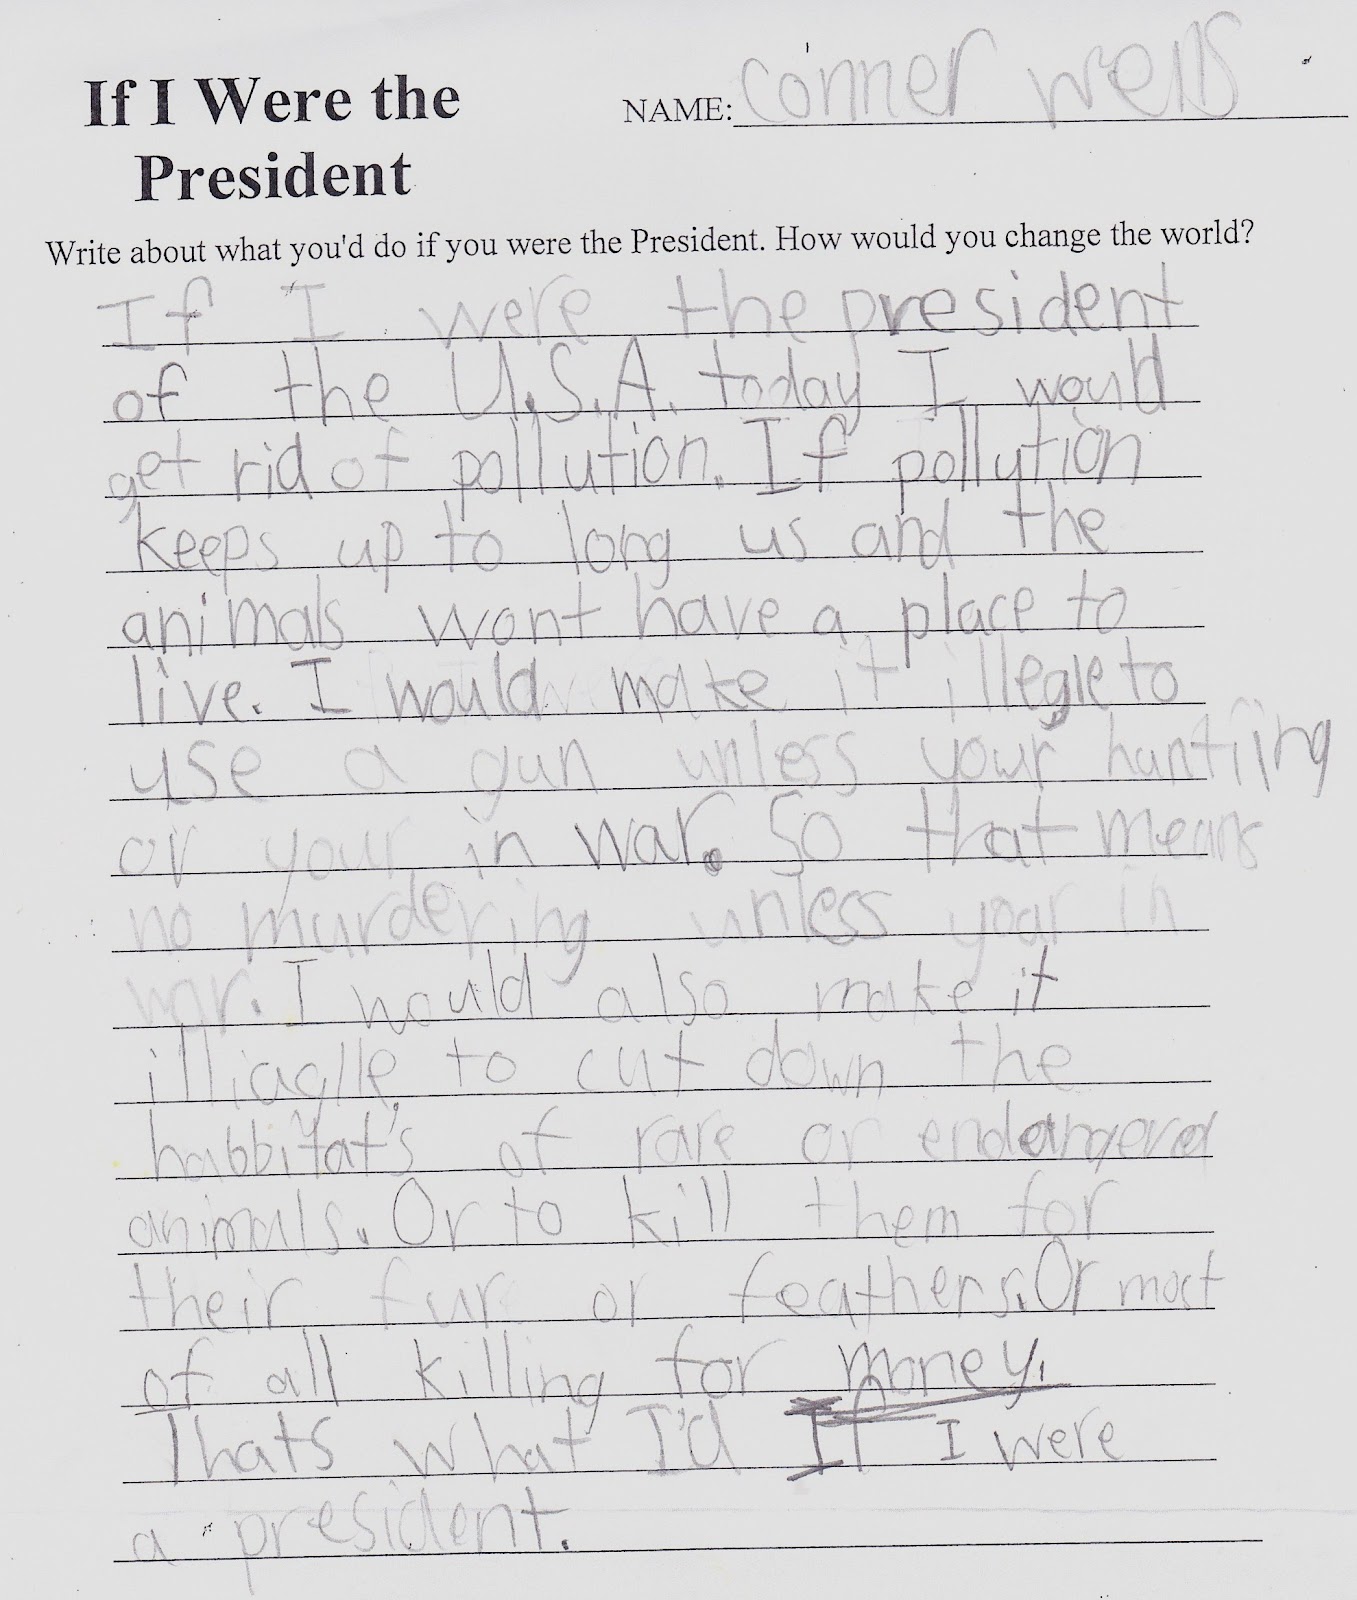 If i were president essay template